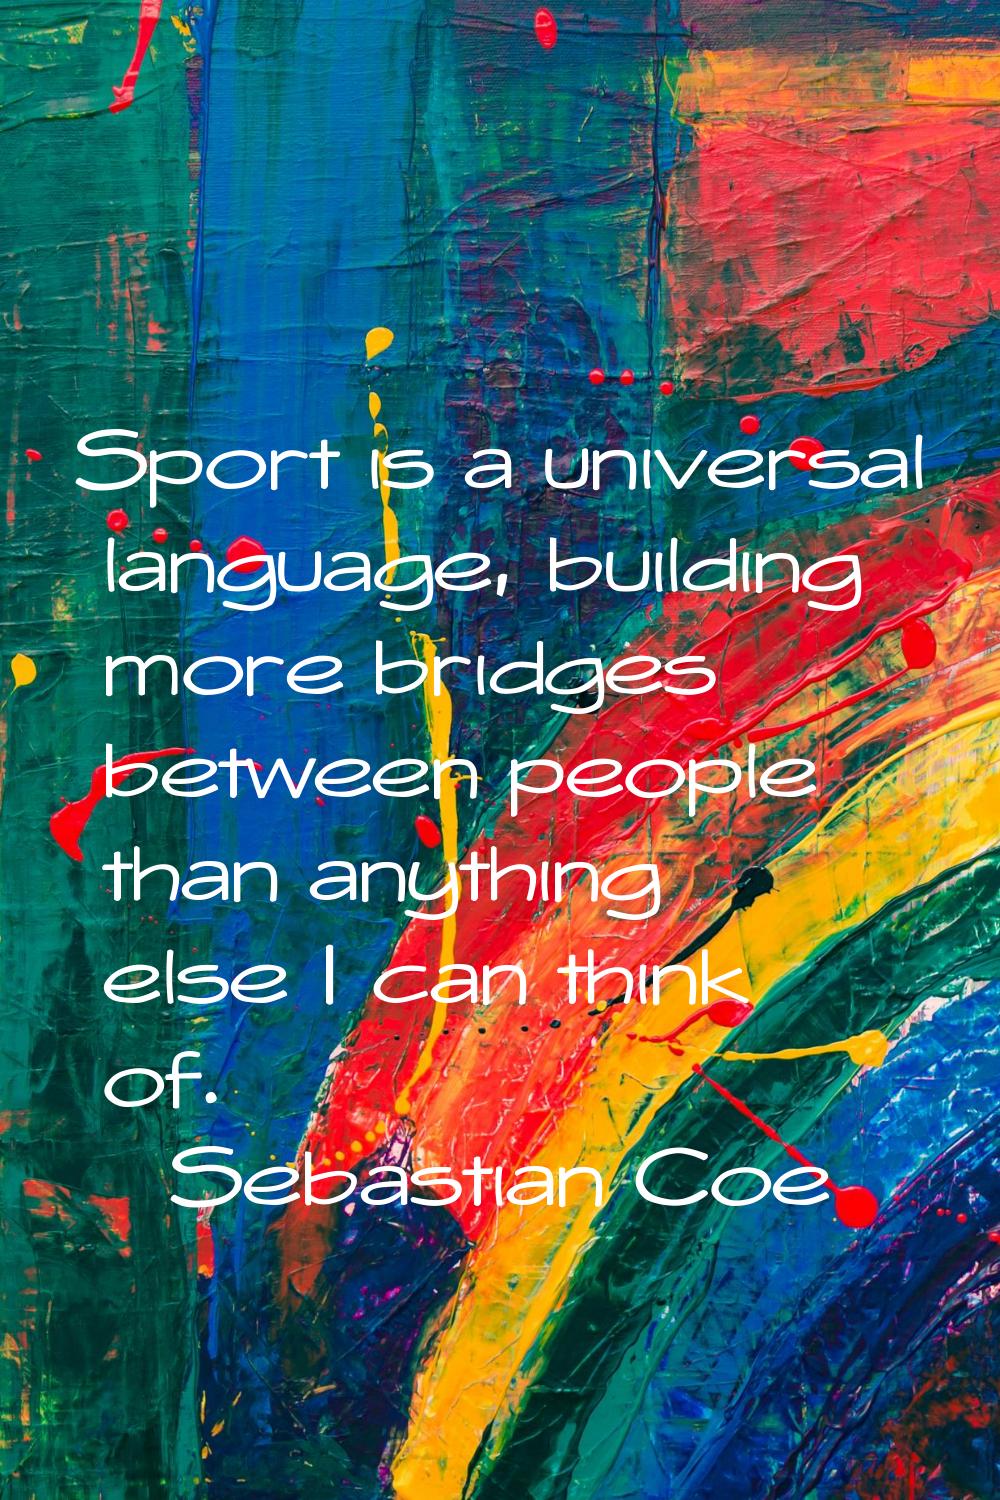 Sport is a universal language, building more bridges between people than anything else I can think 